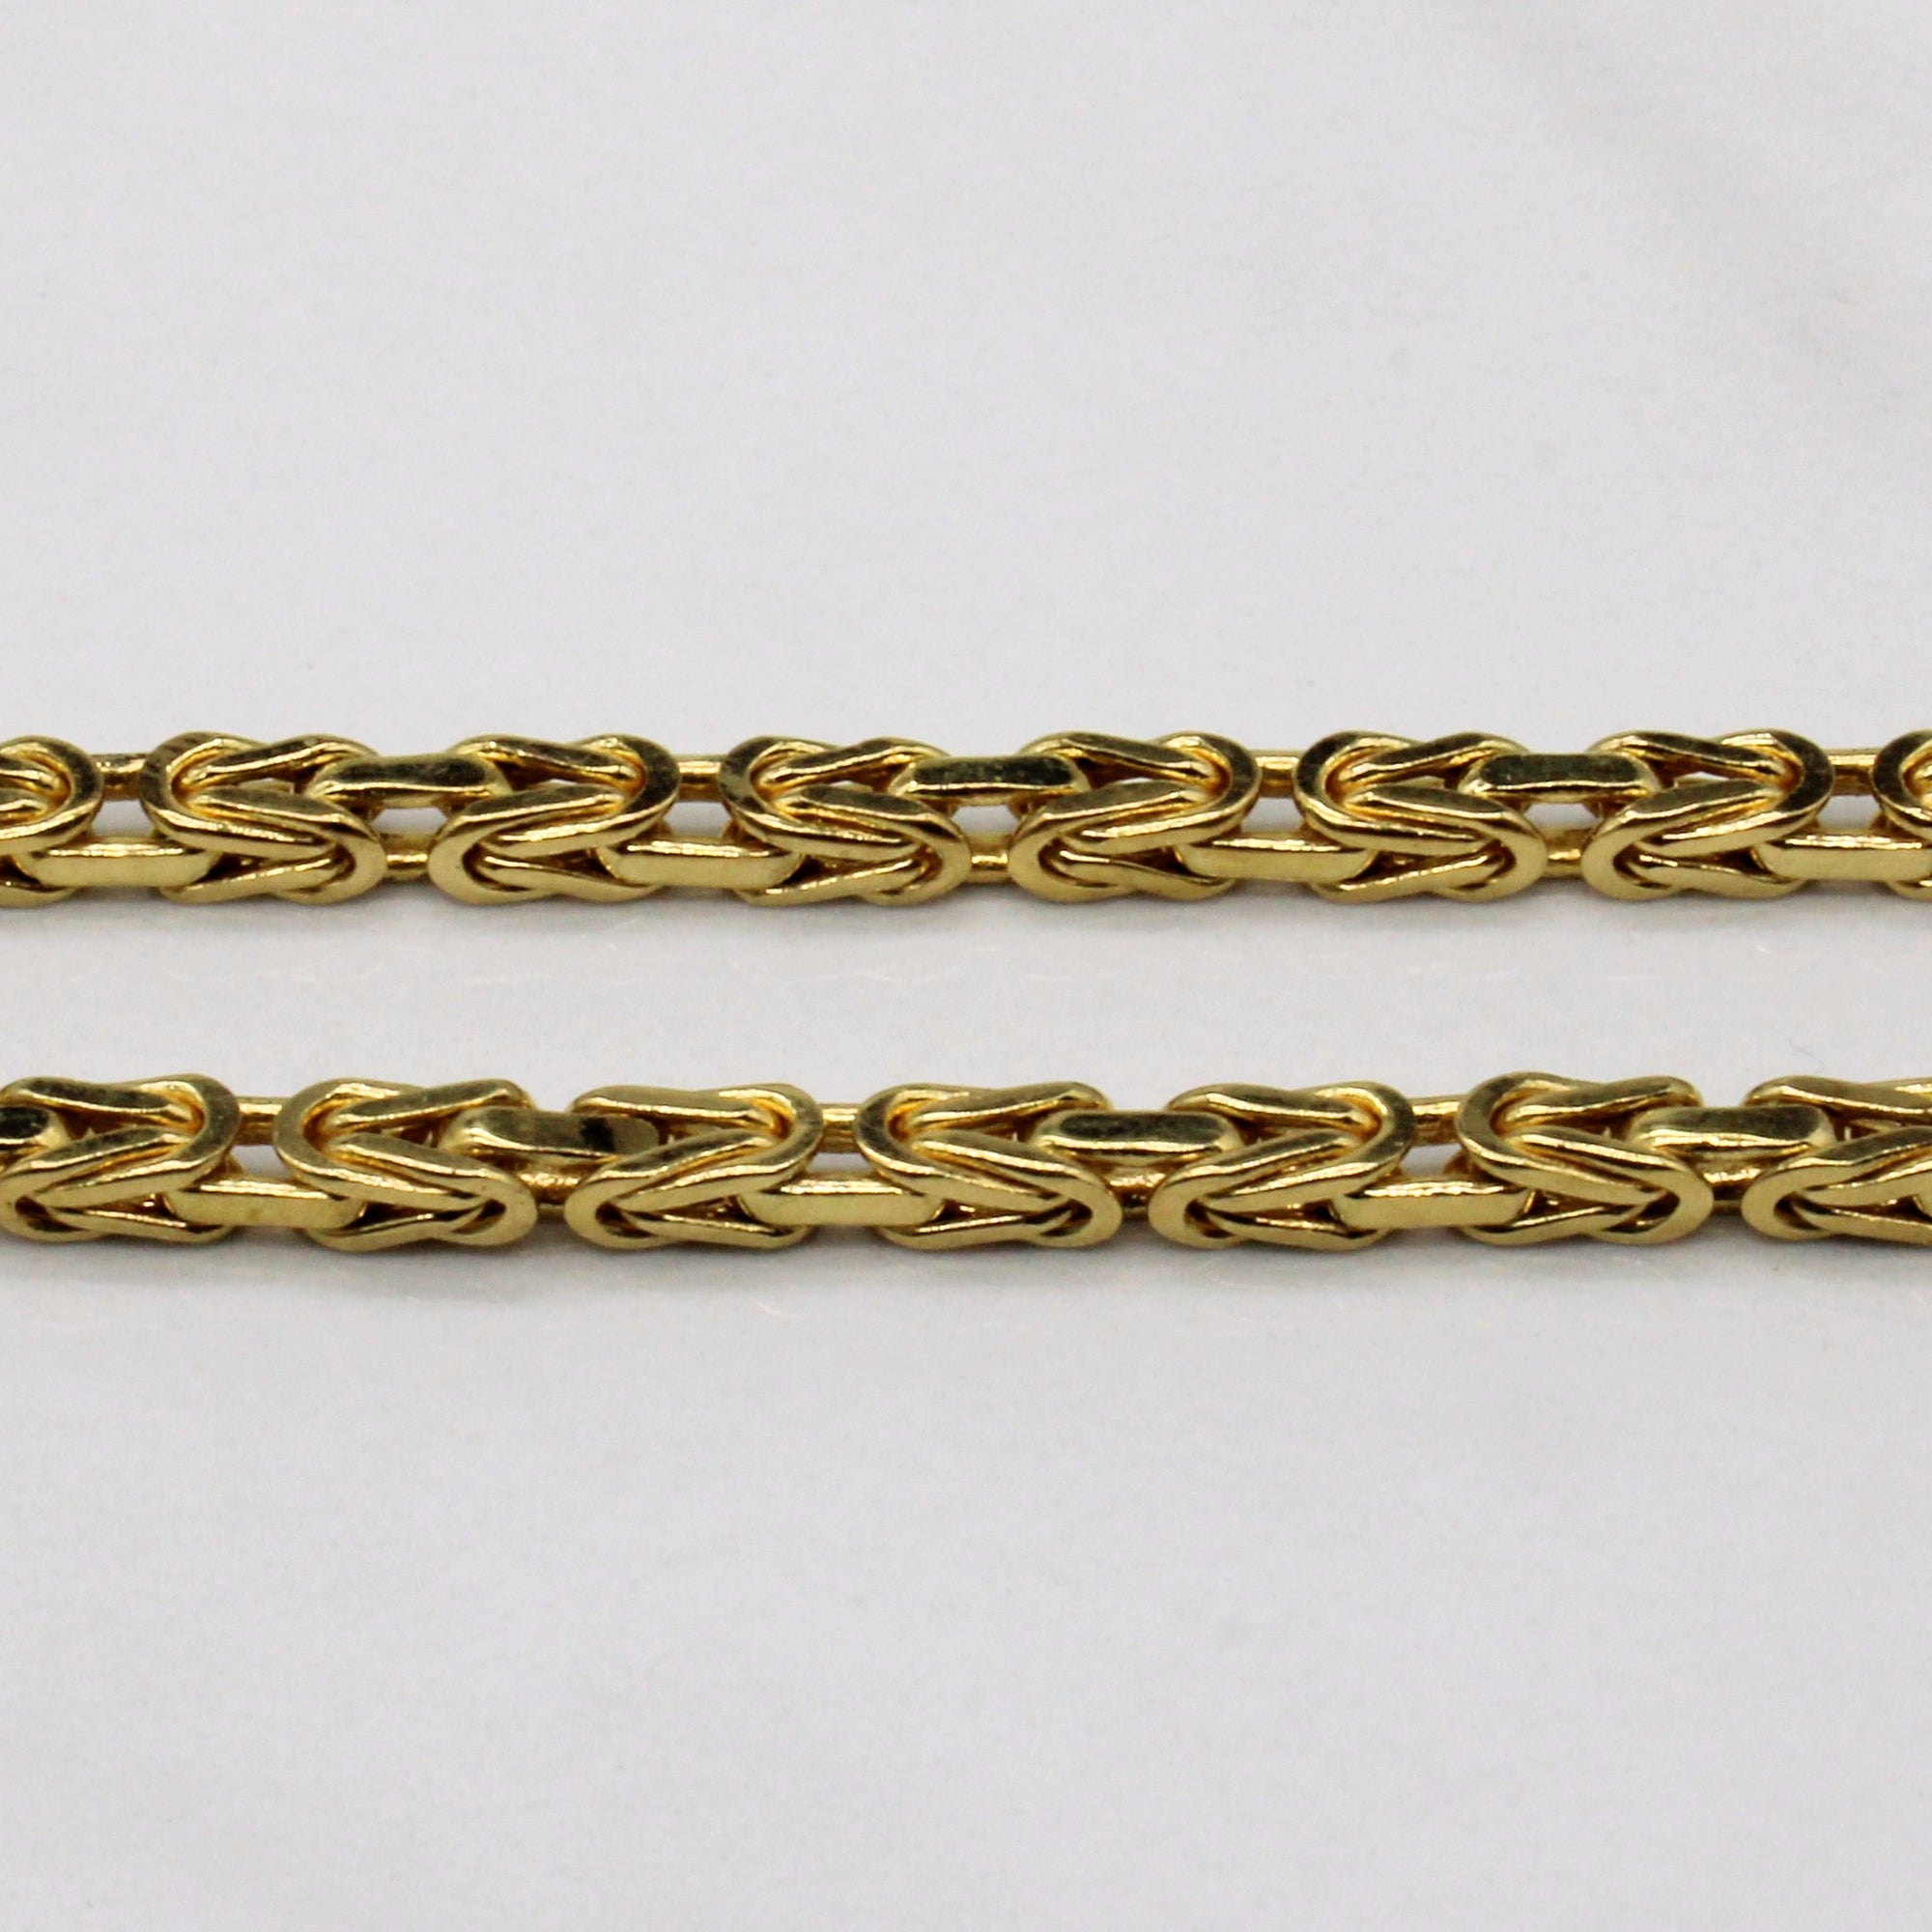 18k Yellow Gold Birdcage Link Chain | 25